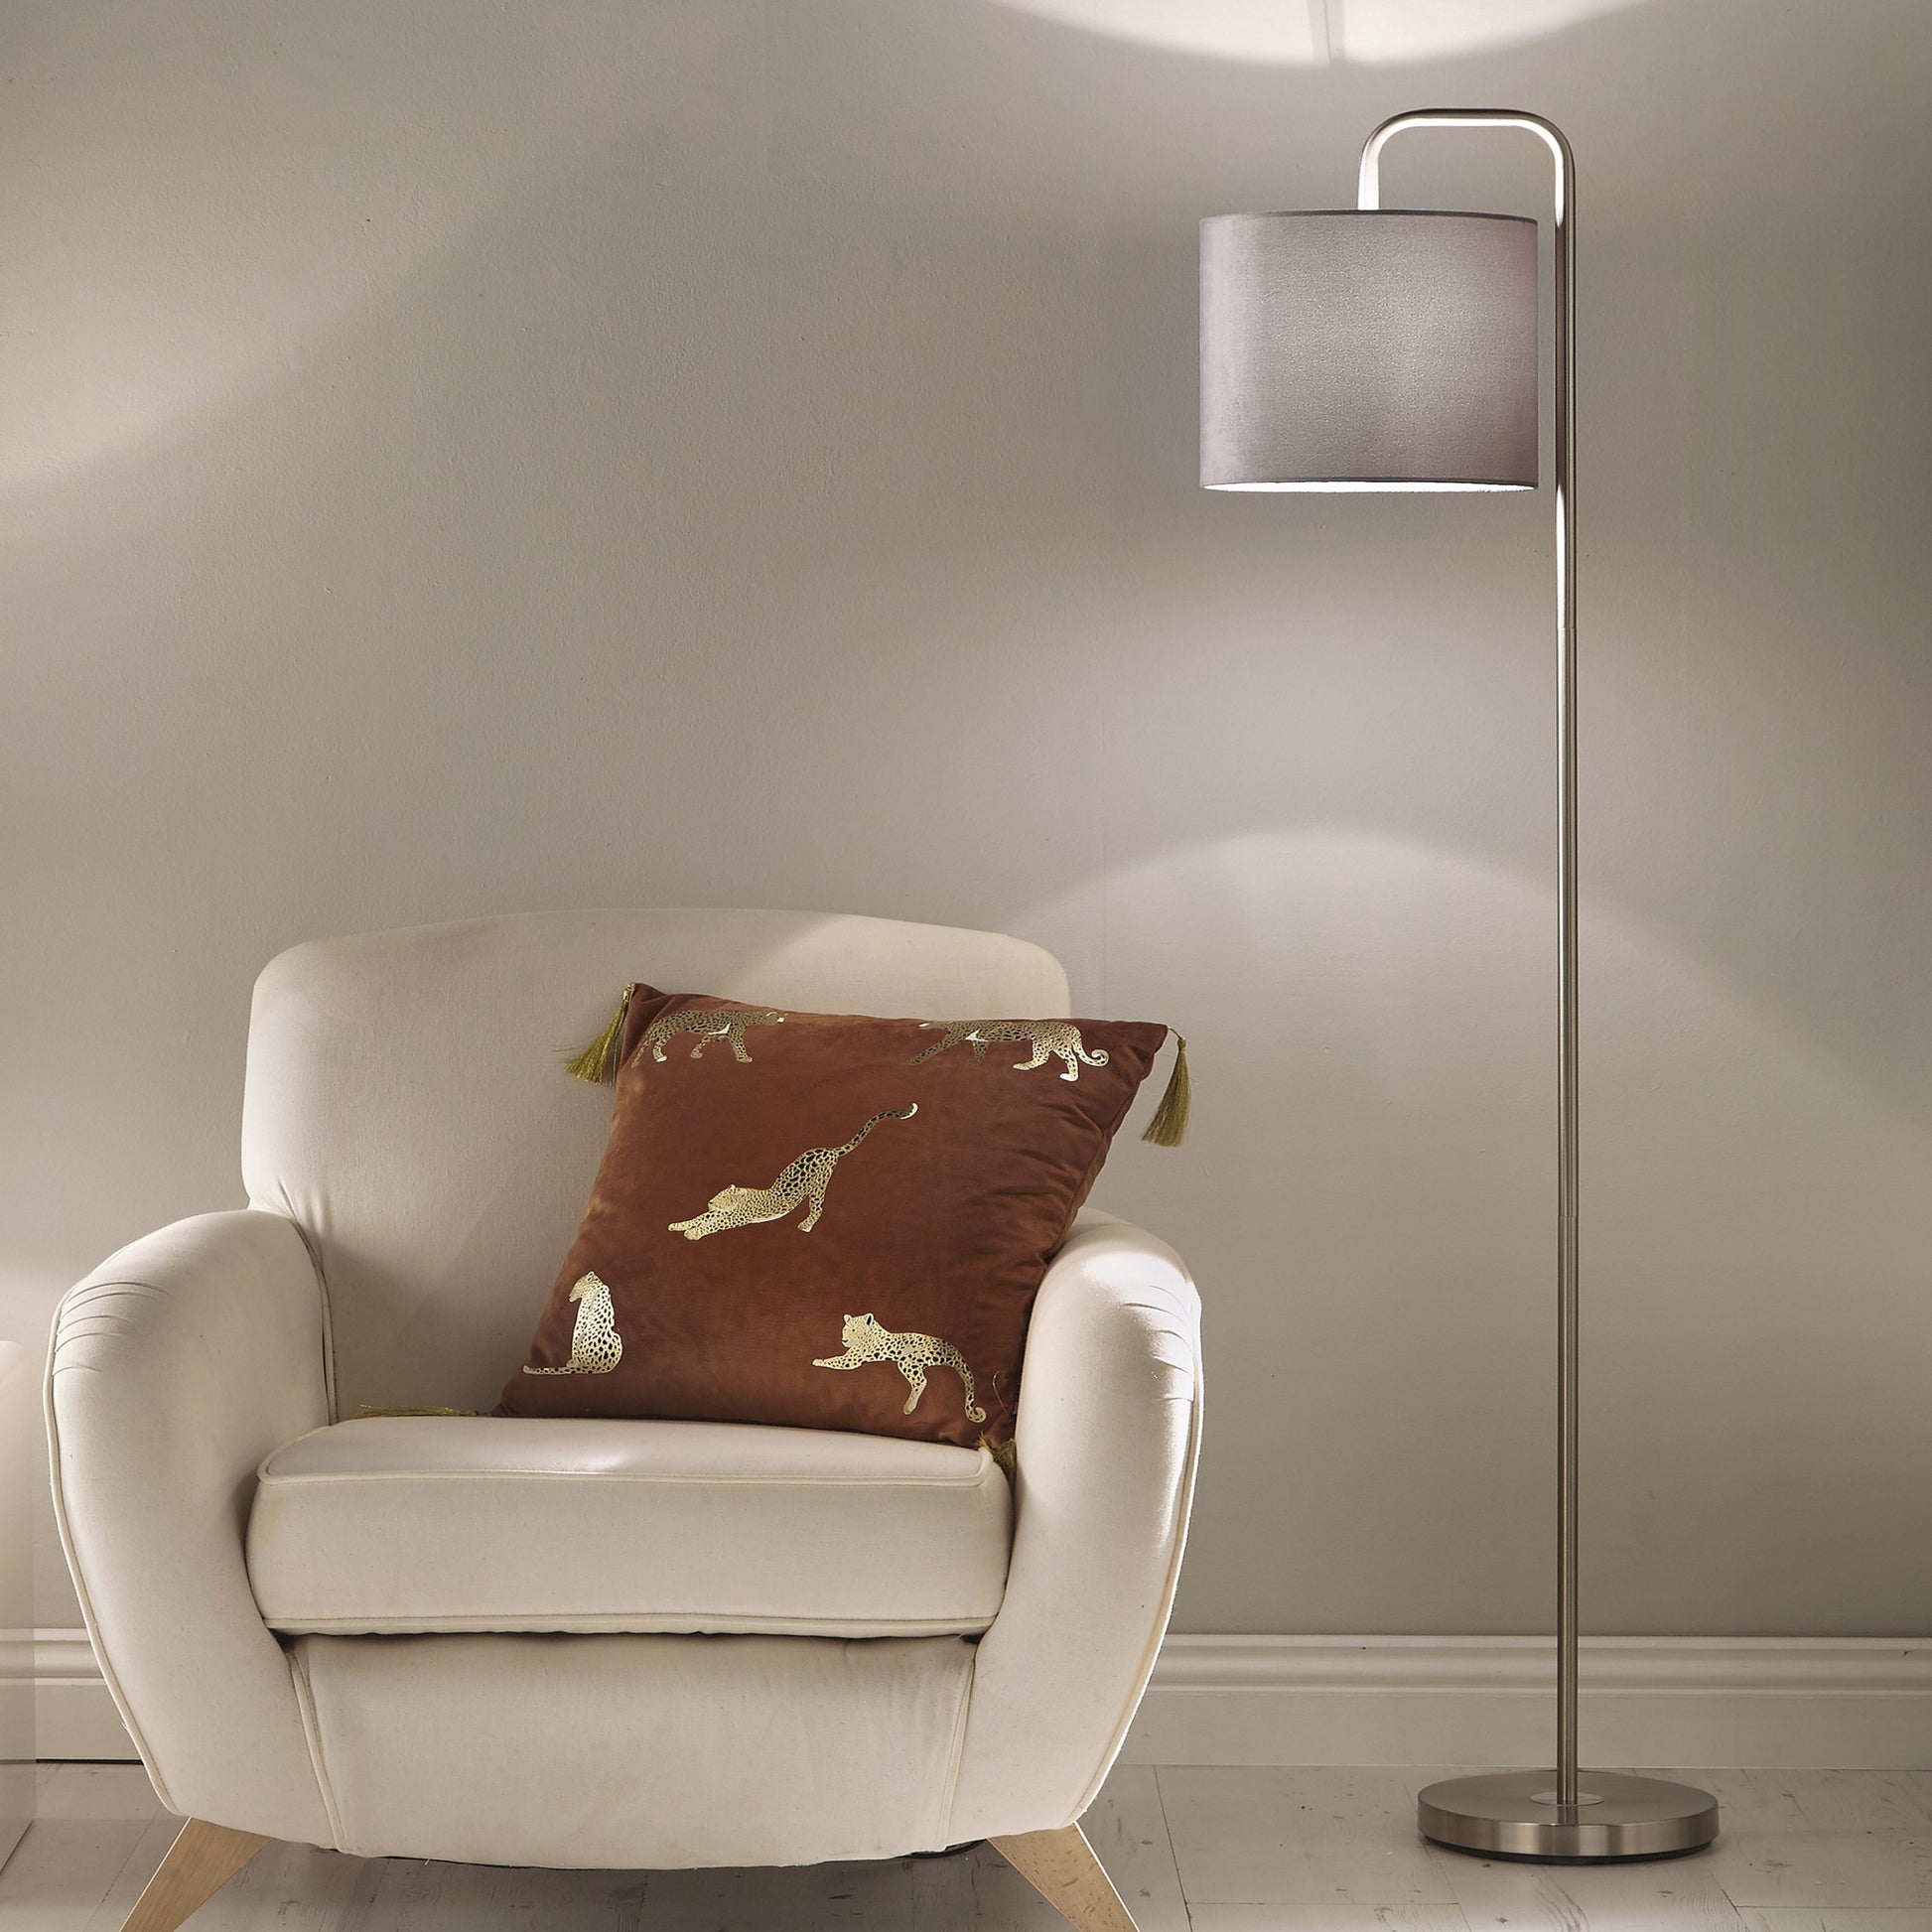 Stunning Satin Nickel Floor Lamp and Table Lamp with Grey Velvet Velour Shade (Options Sold Separately)